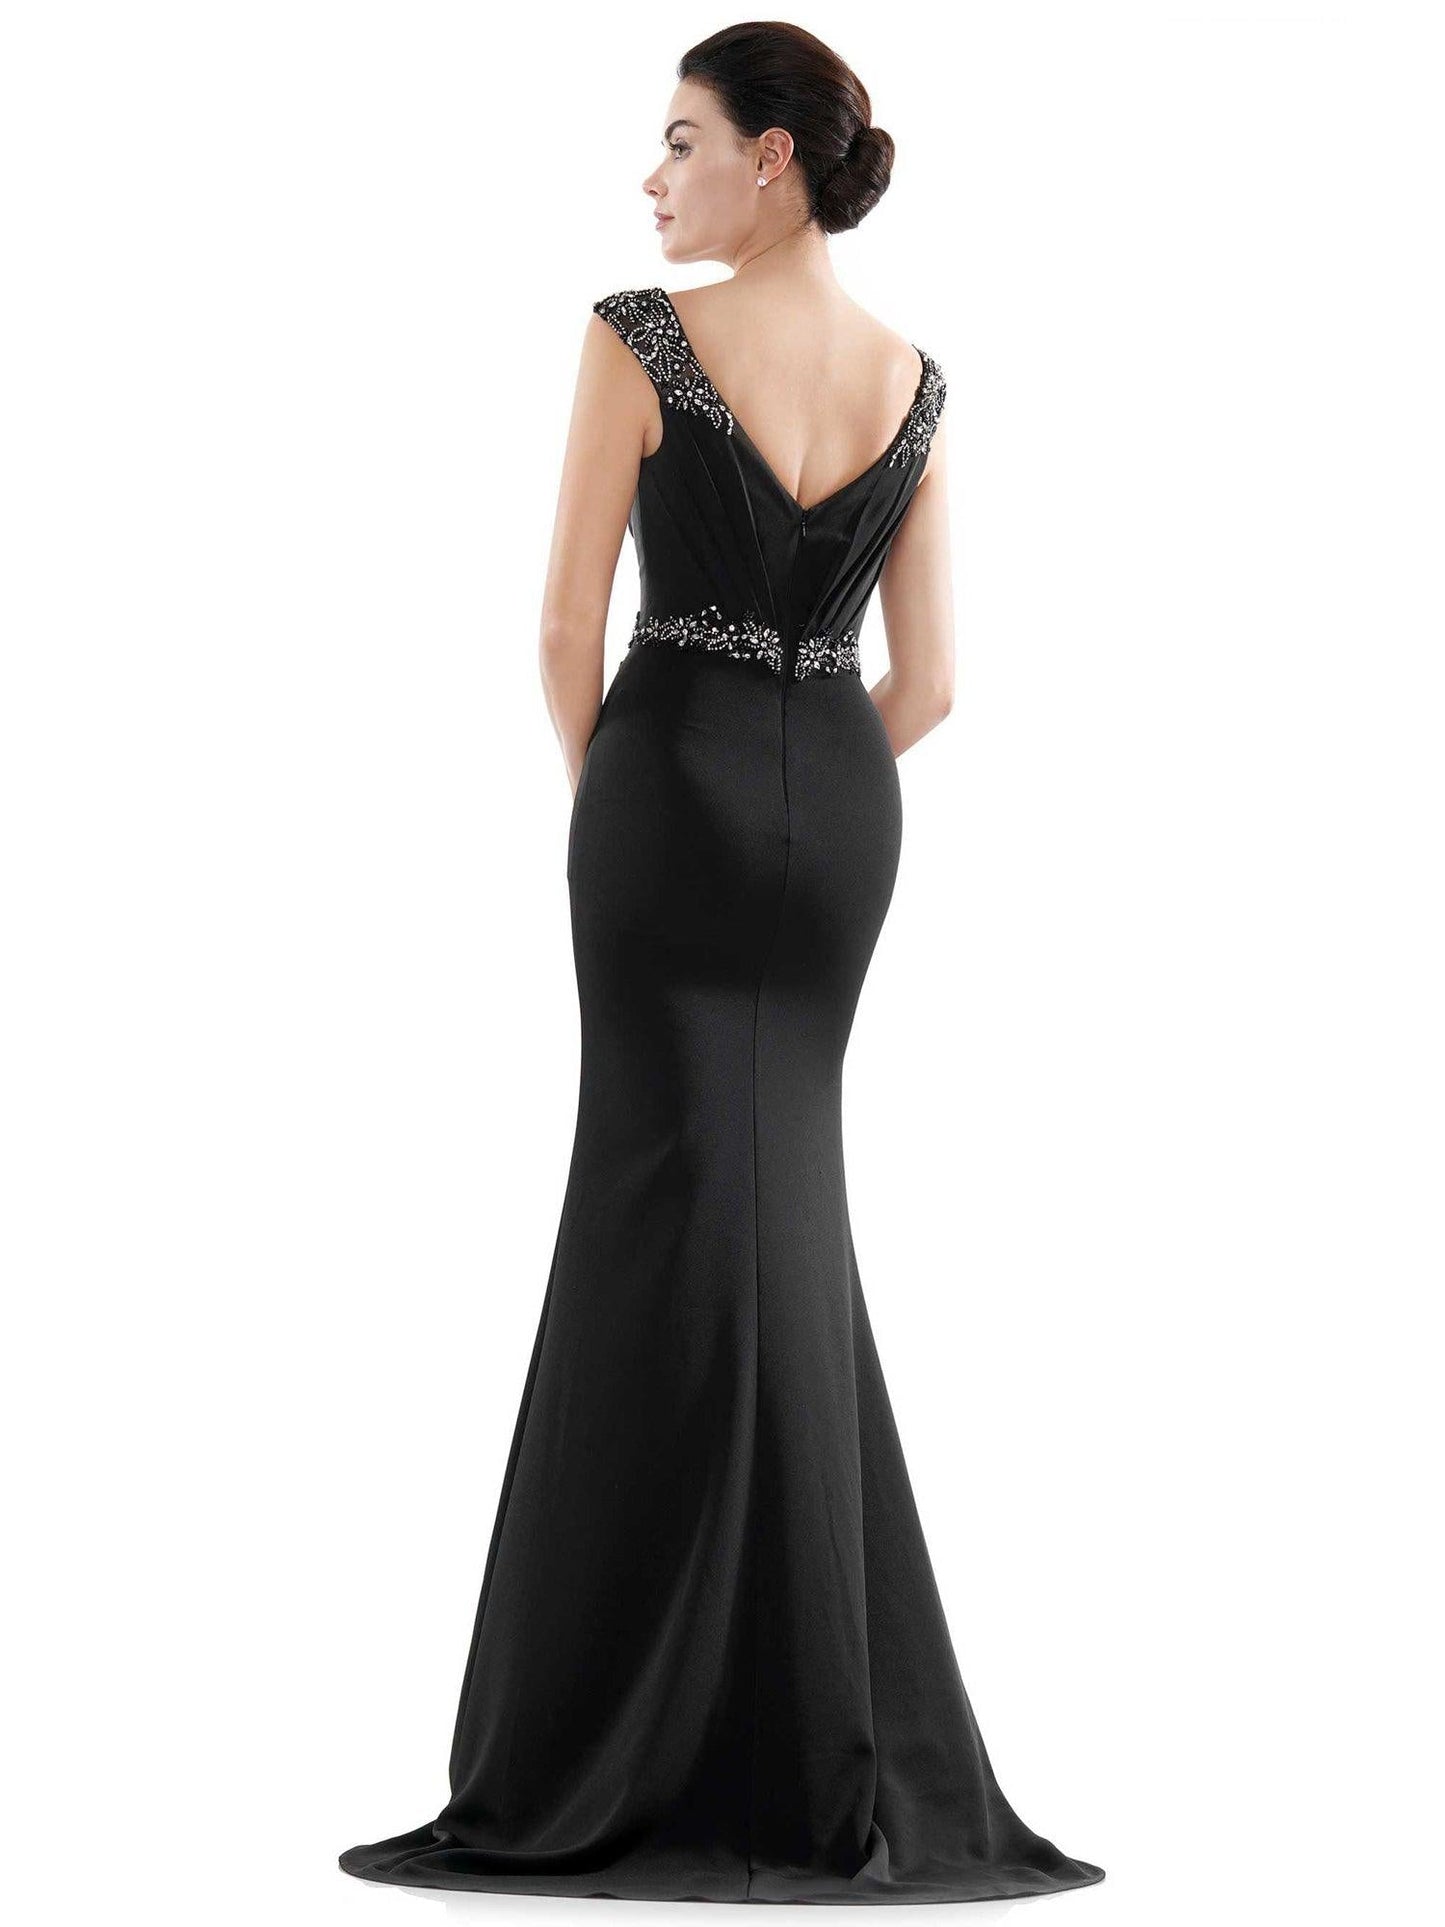 Marsoni Mother of the Bride Pleated Long Gown 1101 - The Dress Outlet